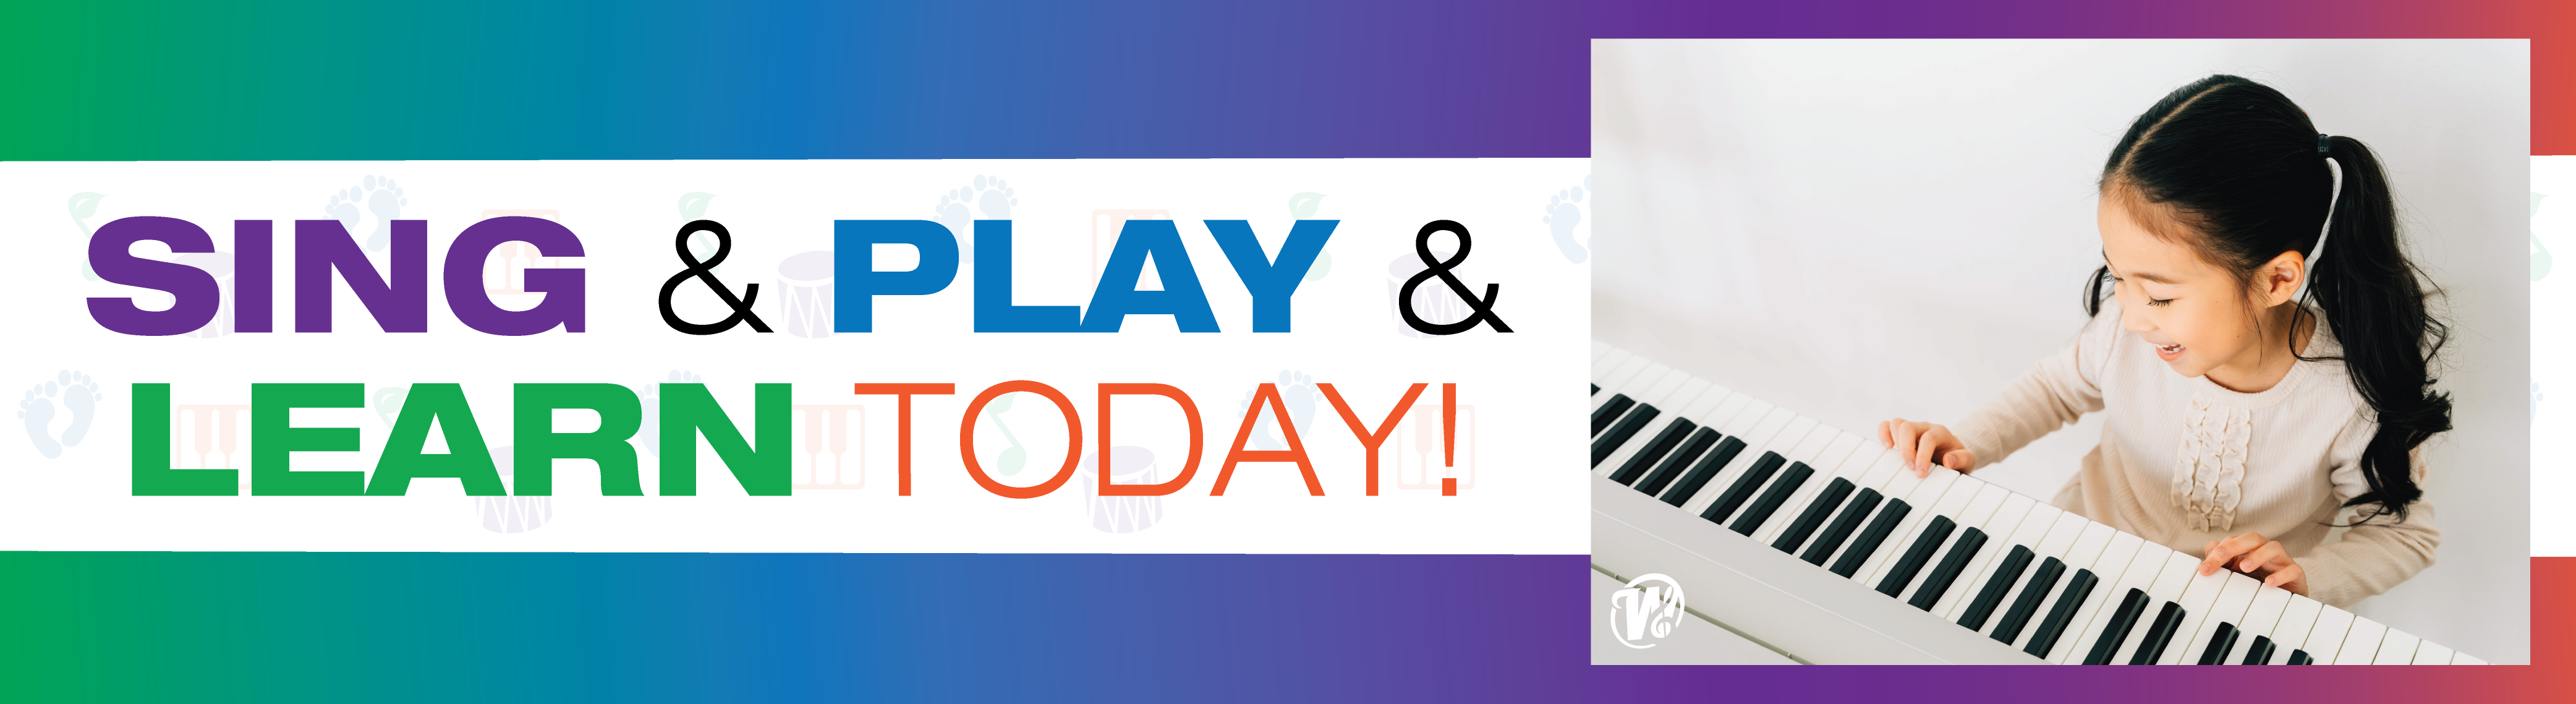 Sing & Play & Learn Today: Child playing the keyboard. 